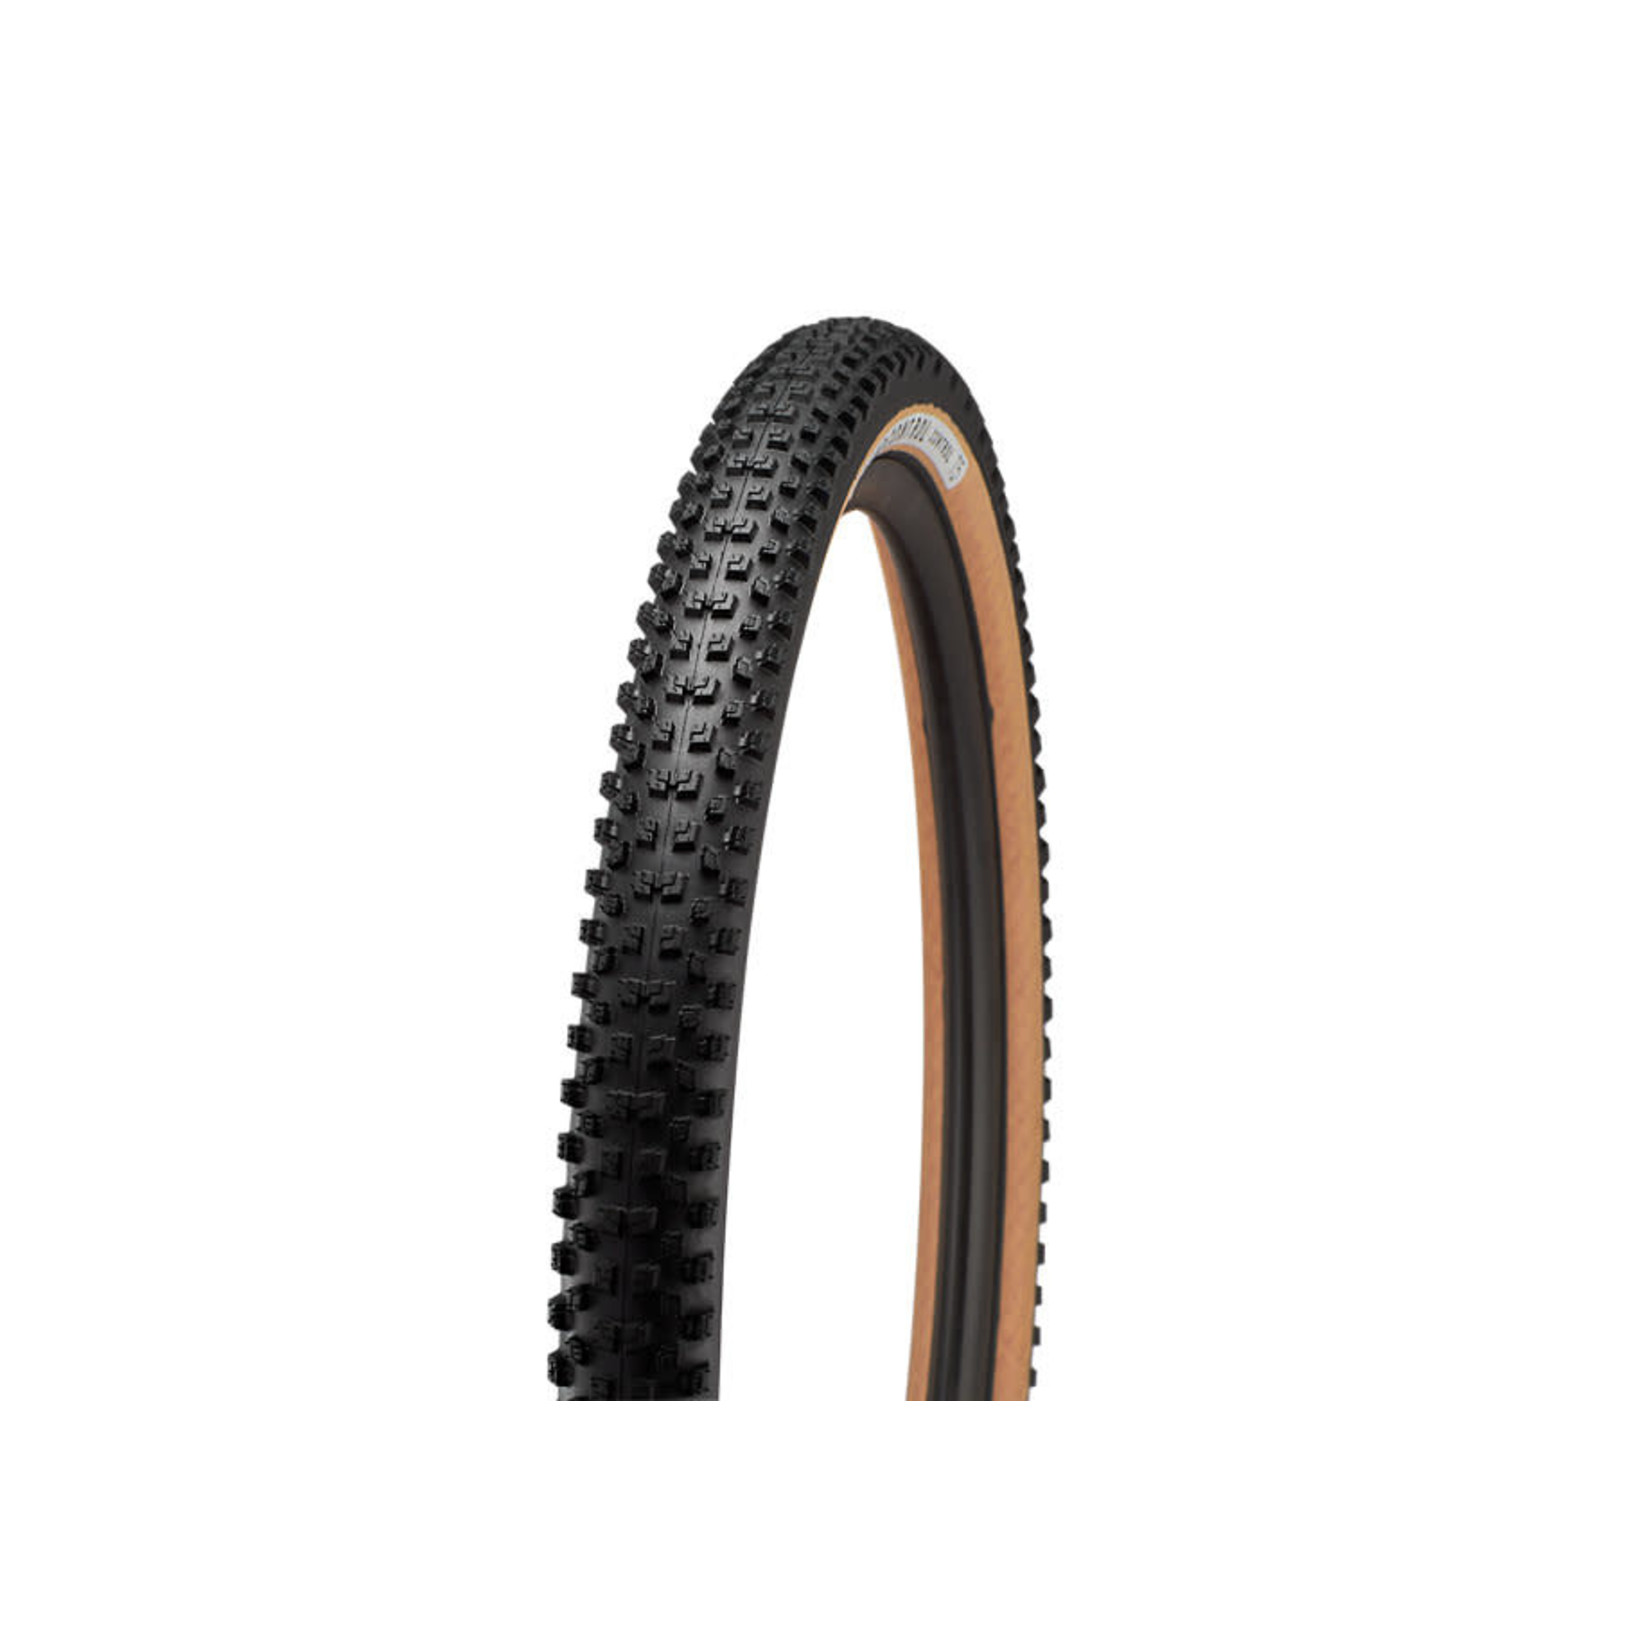 Specialized Ground Control Grid Trail T7 Soil Searching Tire - 29x2.35 - Tan Sidewall